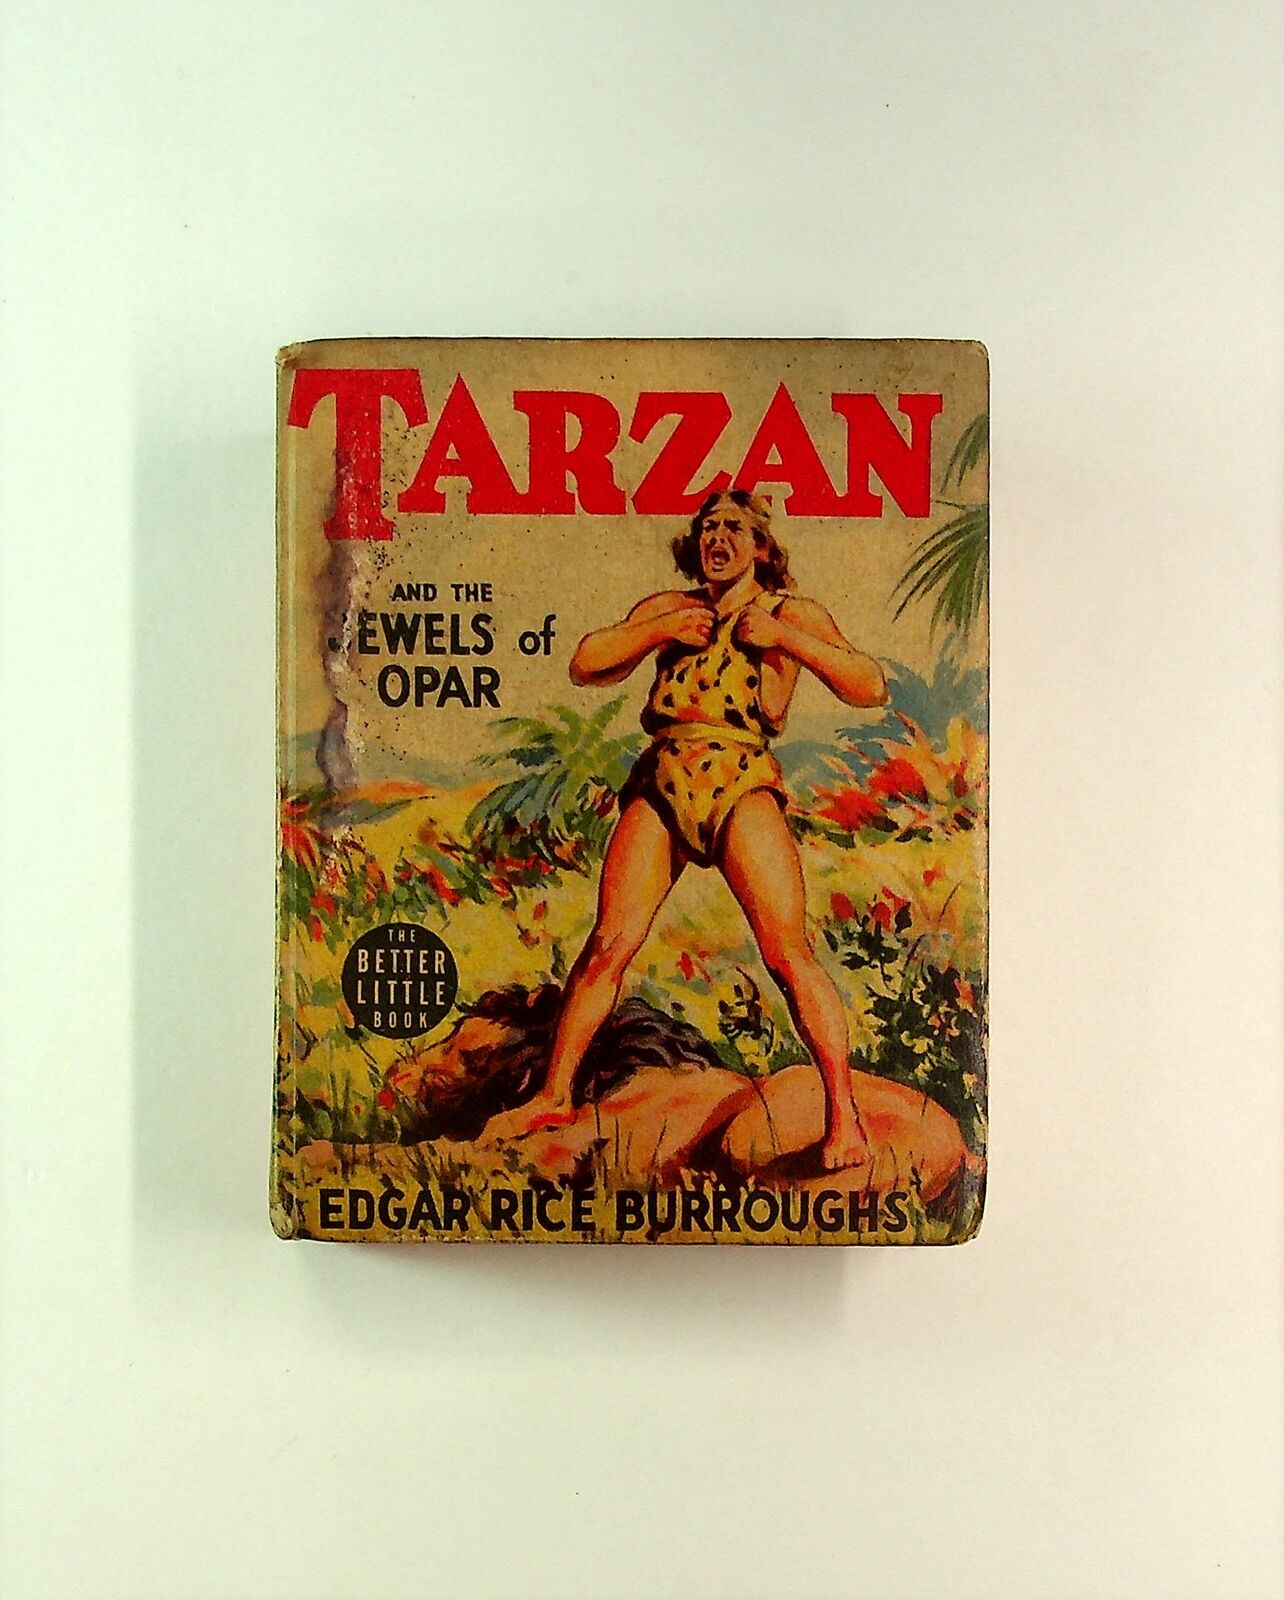 Tarzan and the Jewels of Opar #1495 VG/FN 5.0 1940